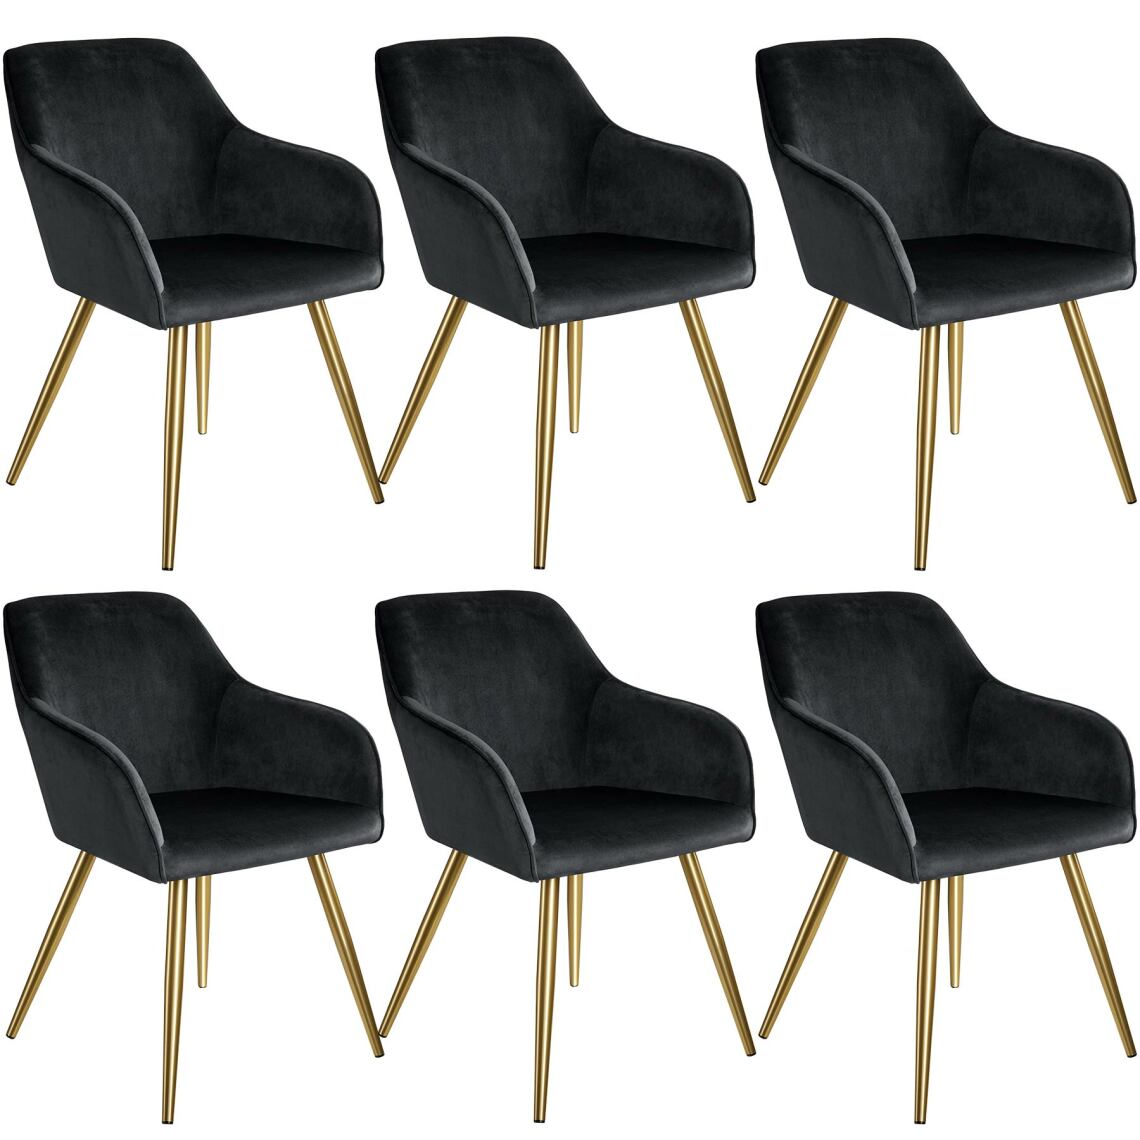 Tectake - 6 Chaises MARILYN Effet Velours Style Scandinave - noir/or - Chaises